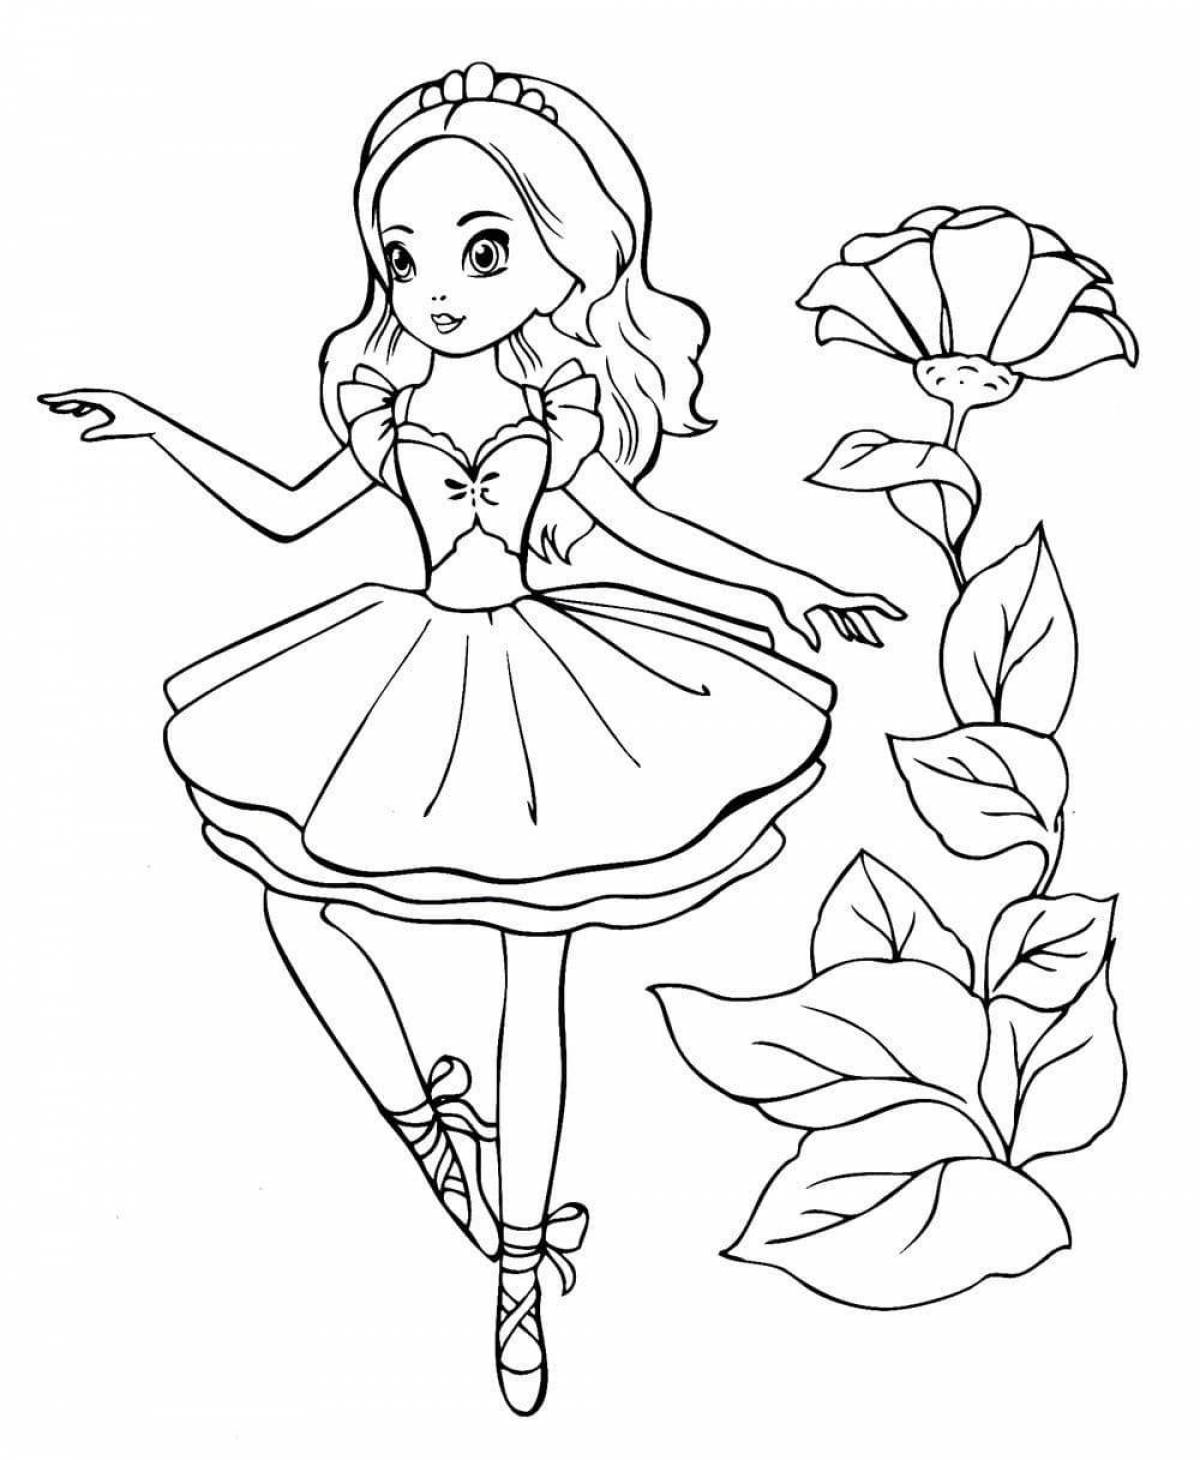 Creative coloring book for girls 6-7 years old